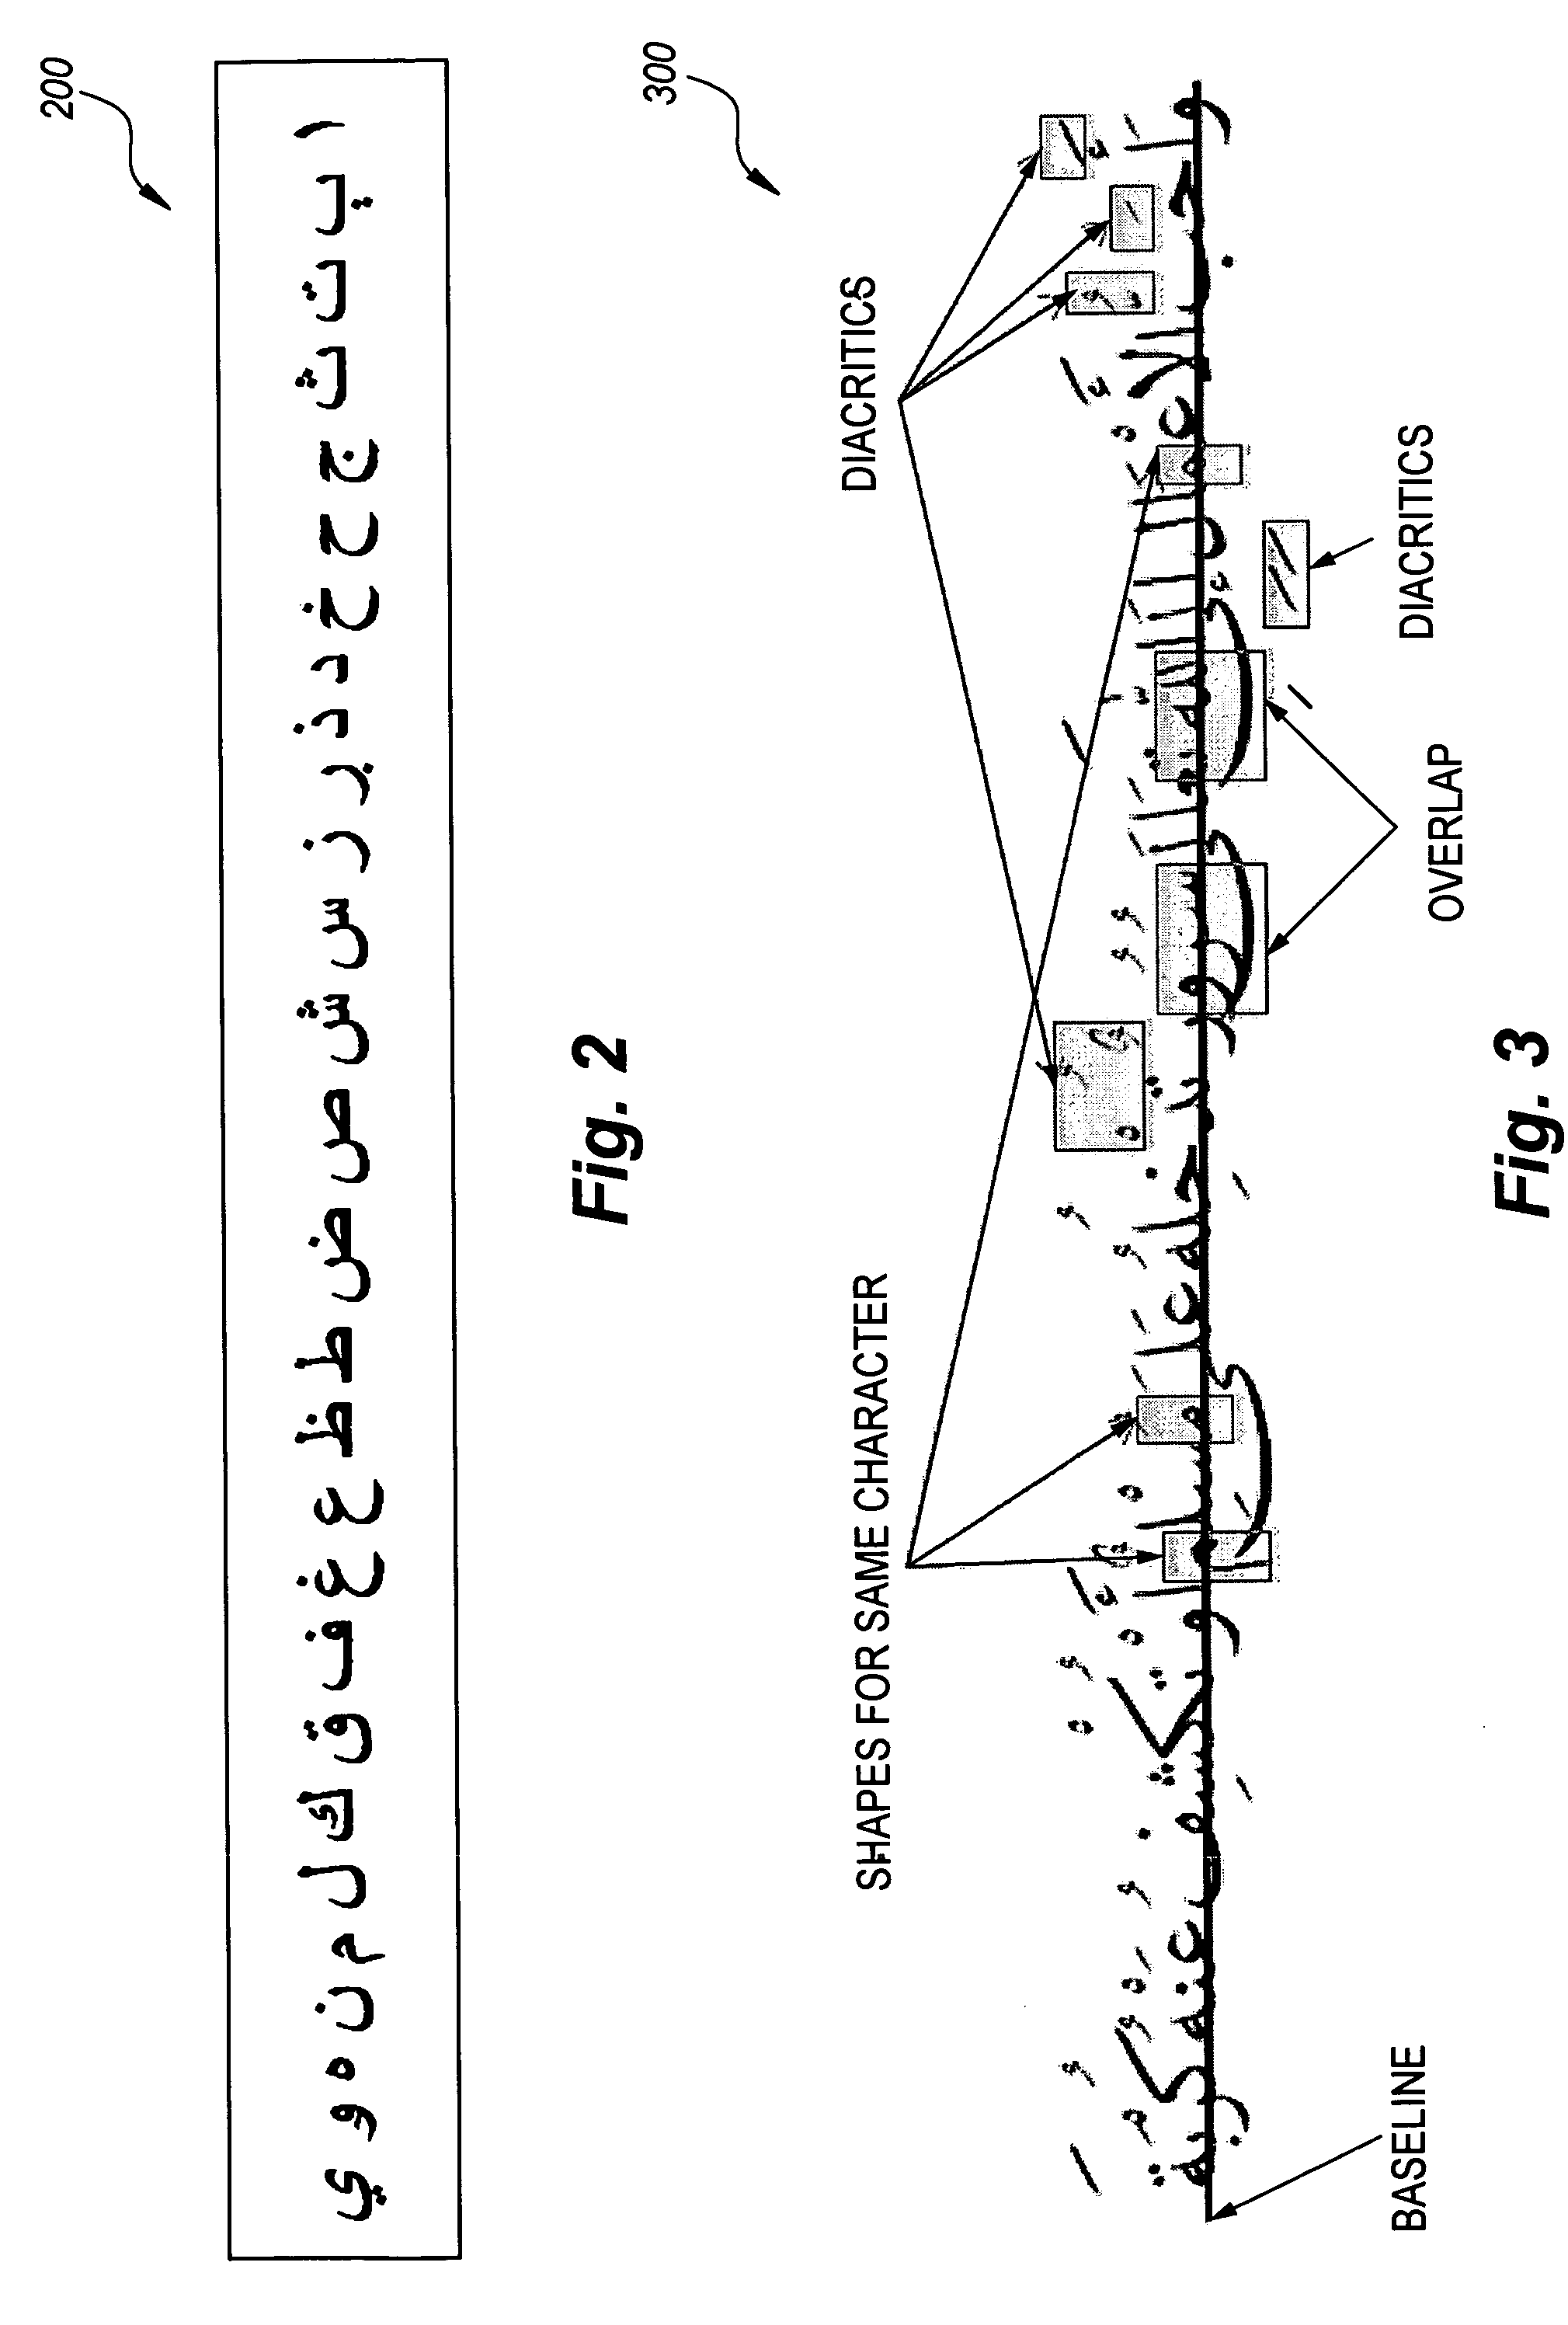 Automatic arabic text image optical character recognition method